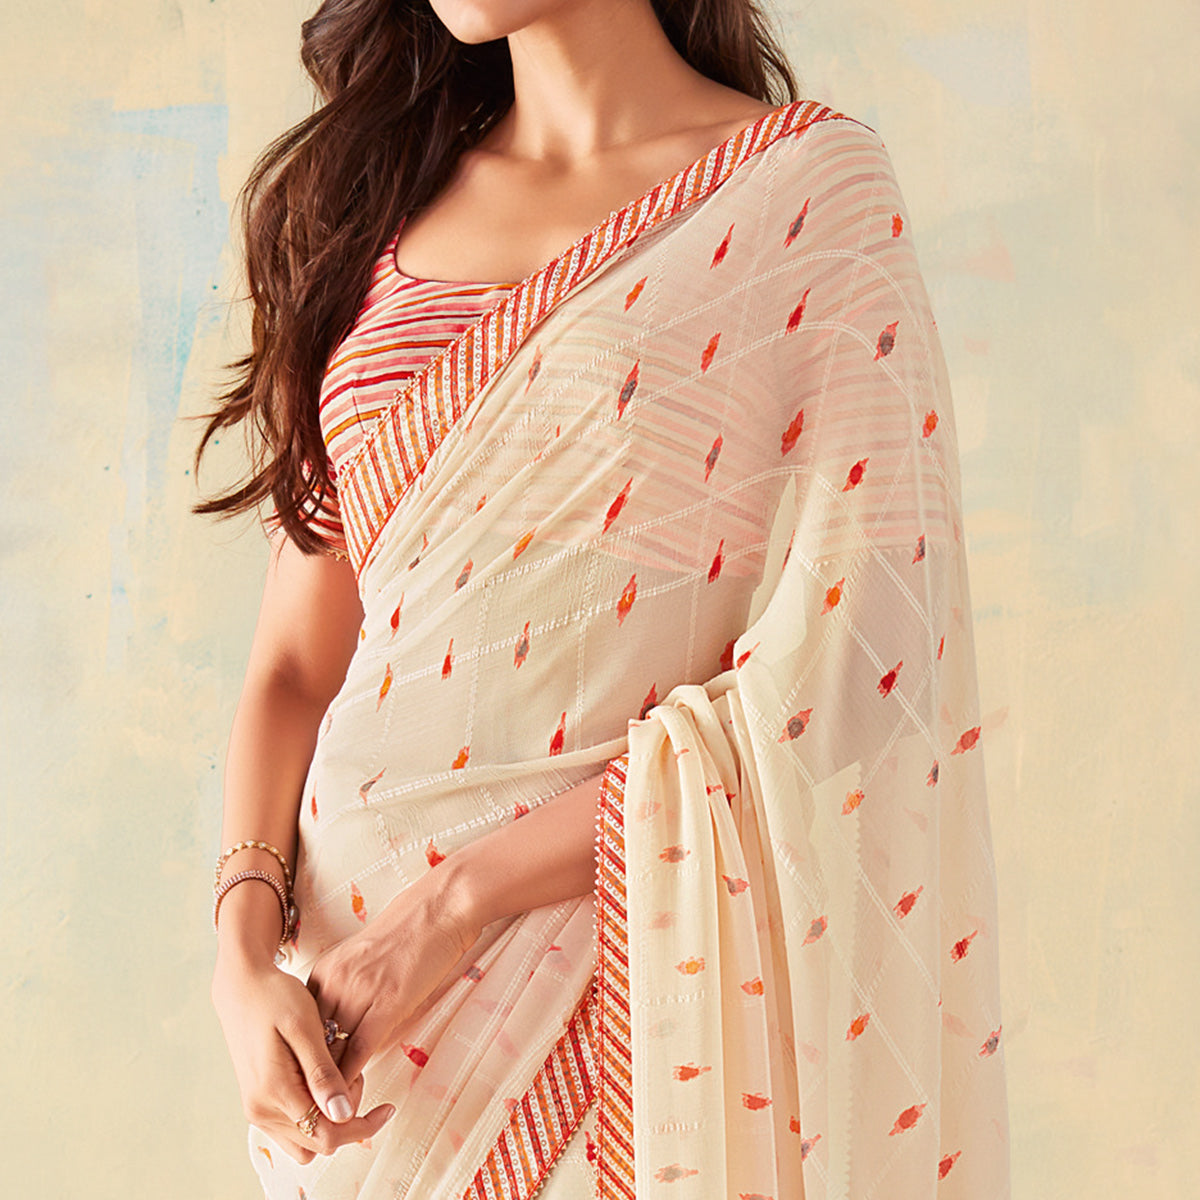 Off White Printed With Gota Patti Border Georgette Saree With Tassels